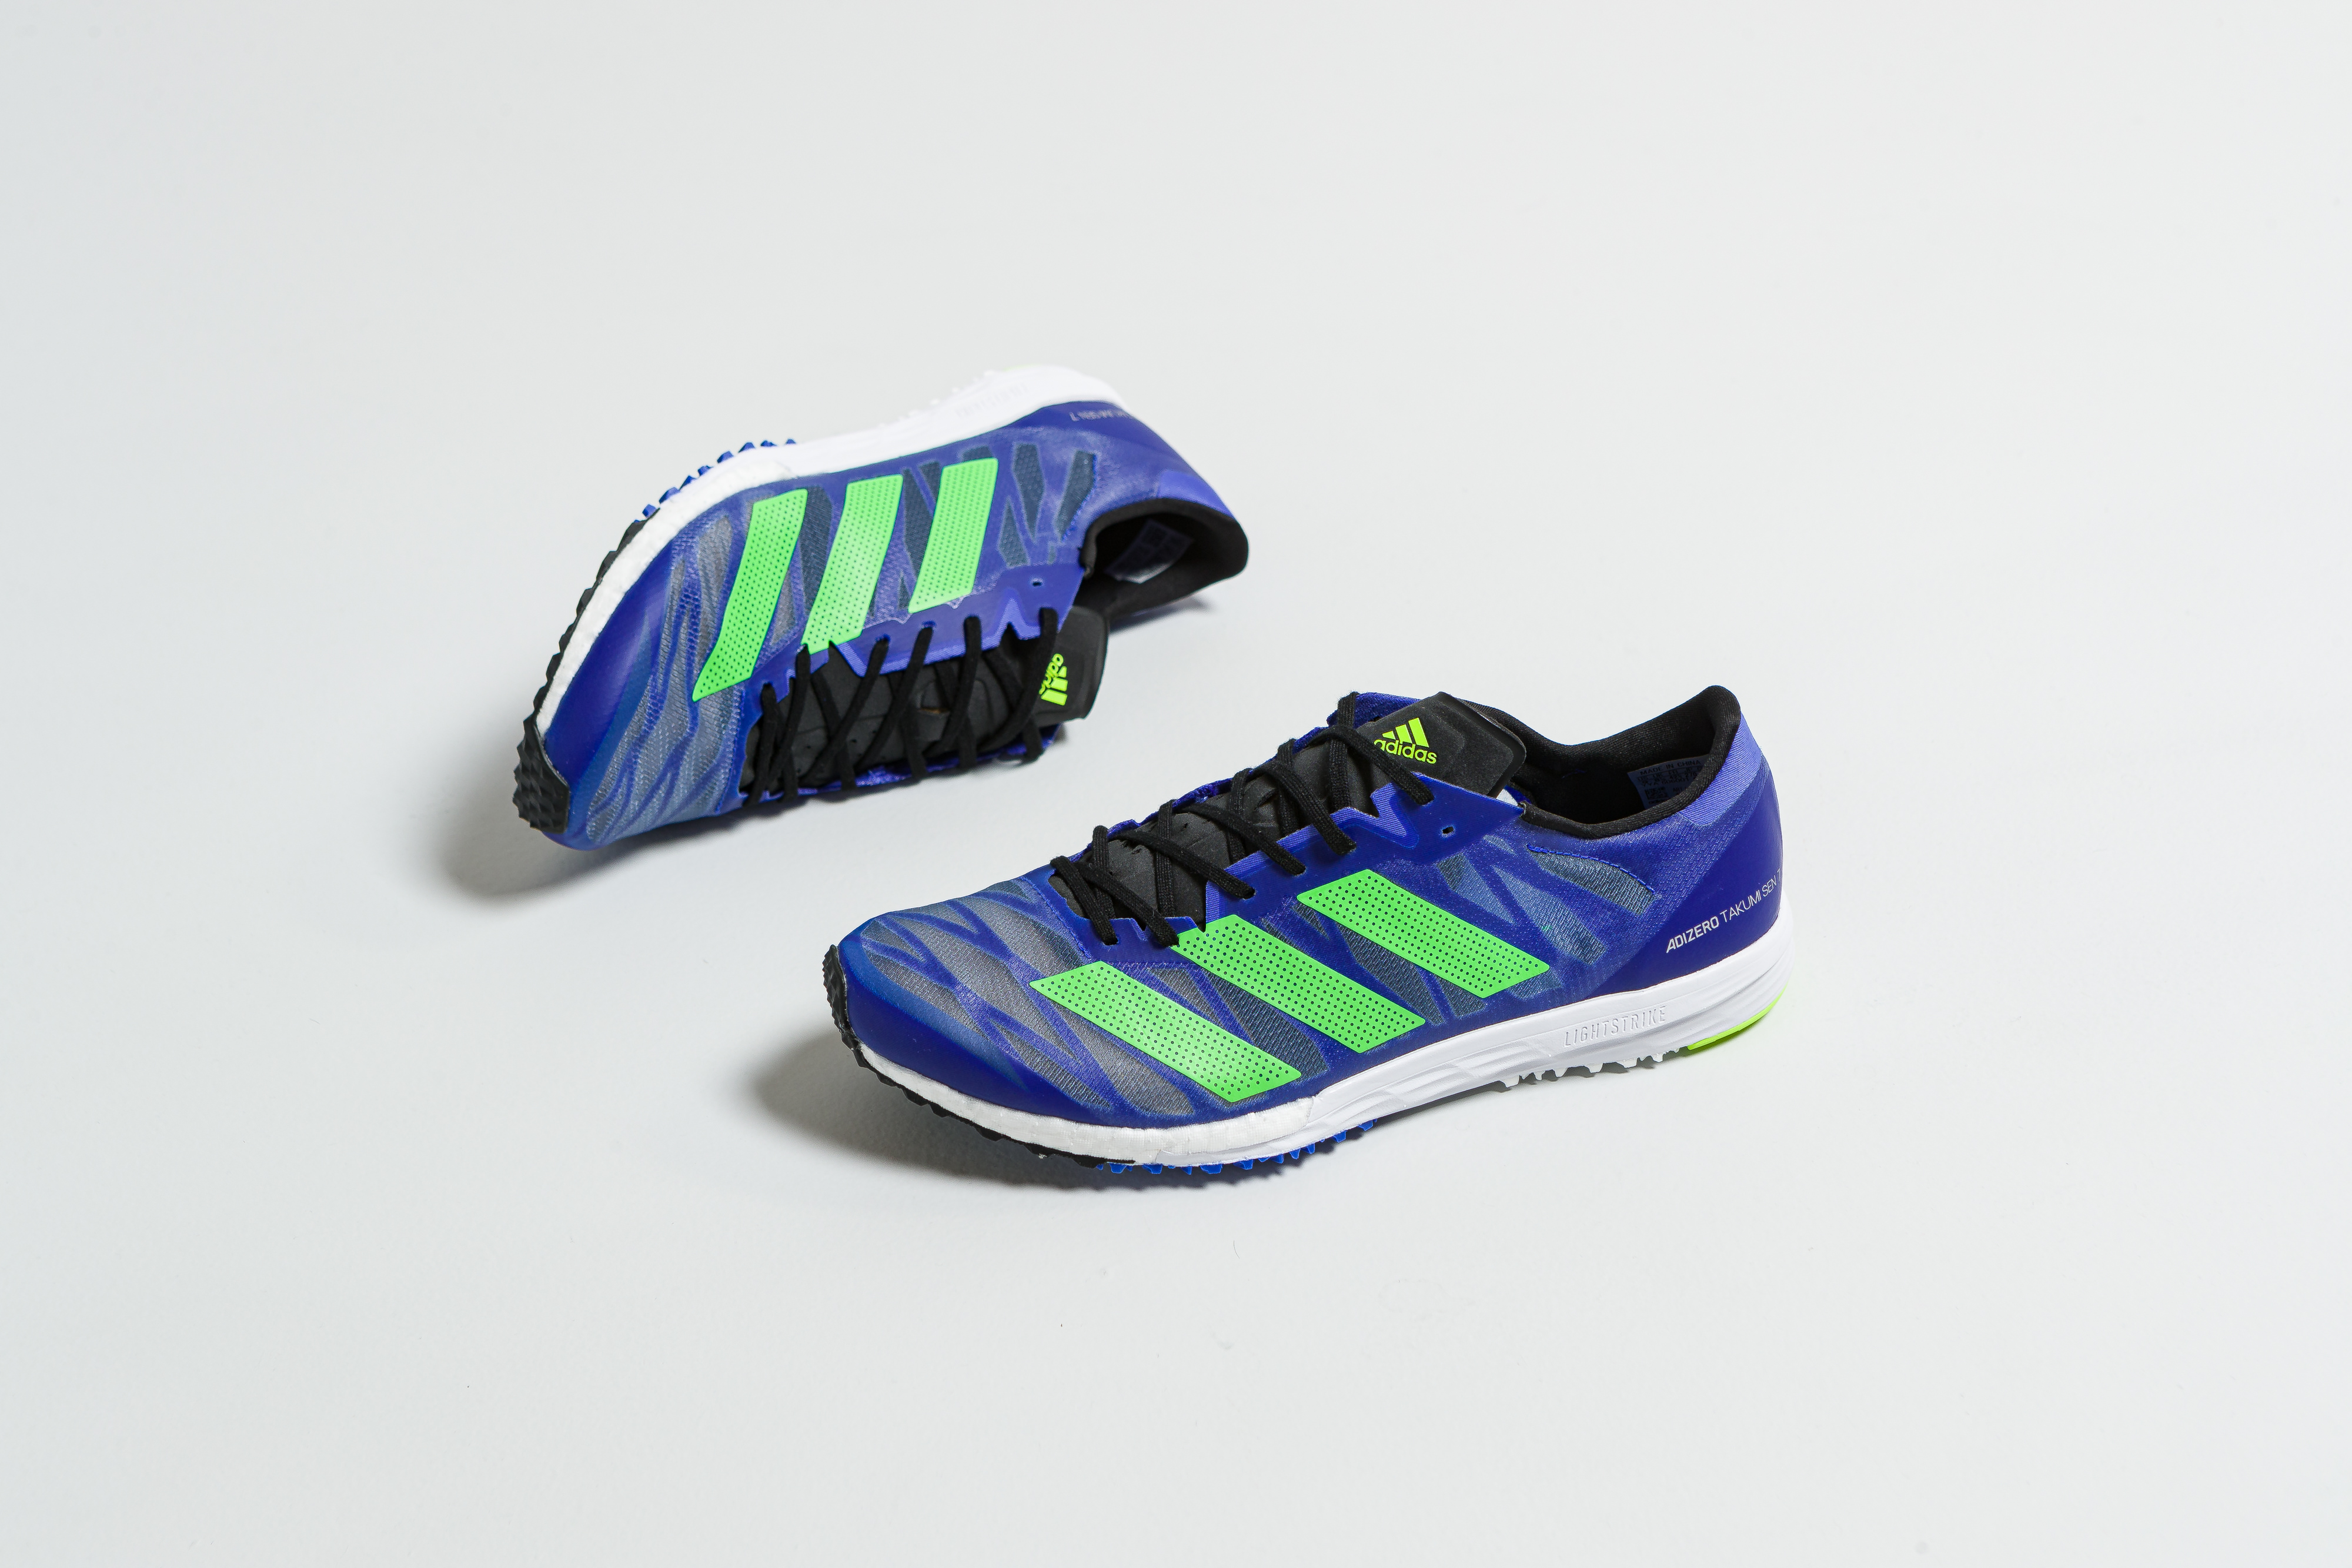 Chaleco Transporte Para construir adidas New Race-Ready Sonic Ink, Screaming Green Pack | Up There Athletics